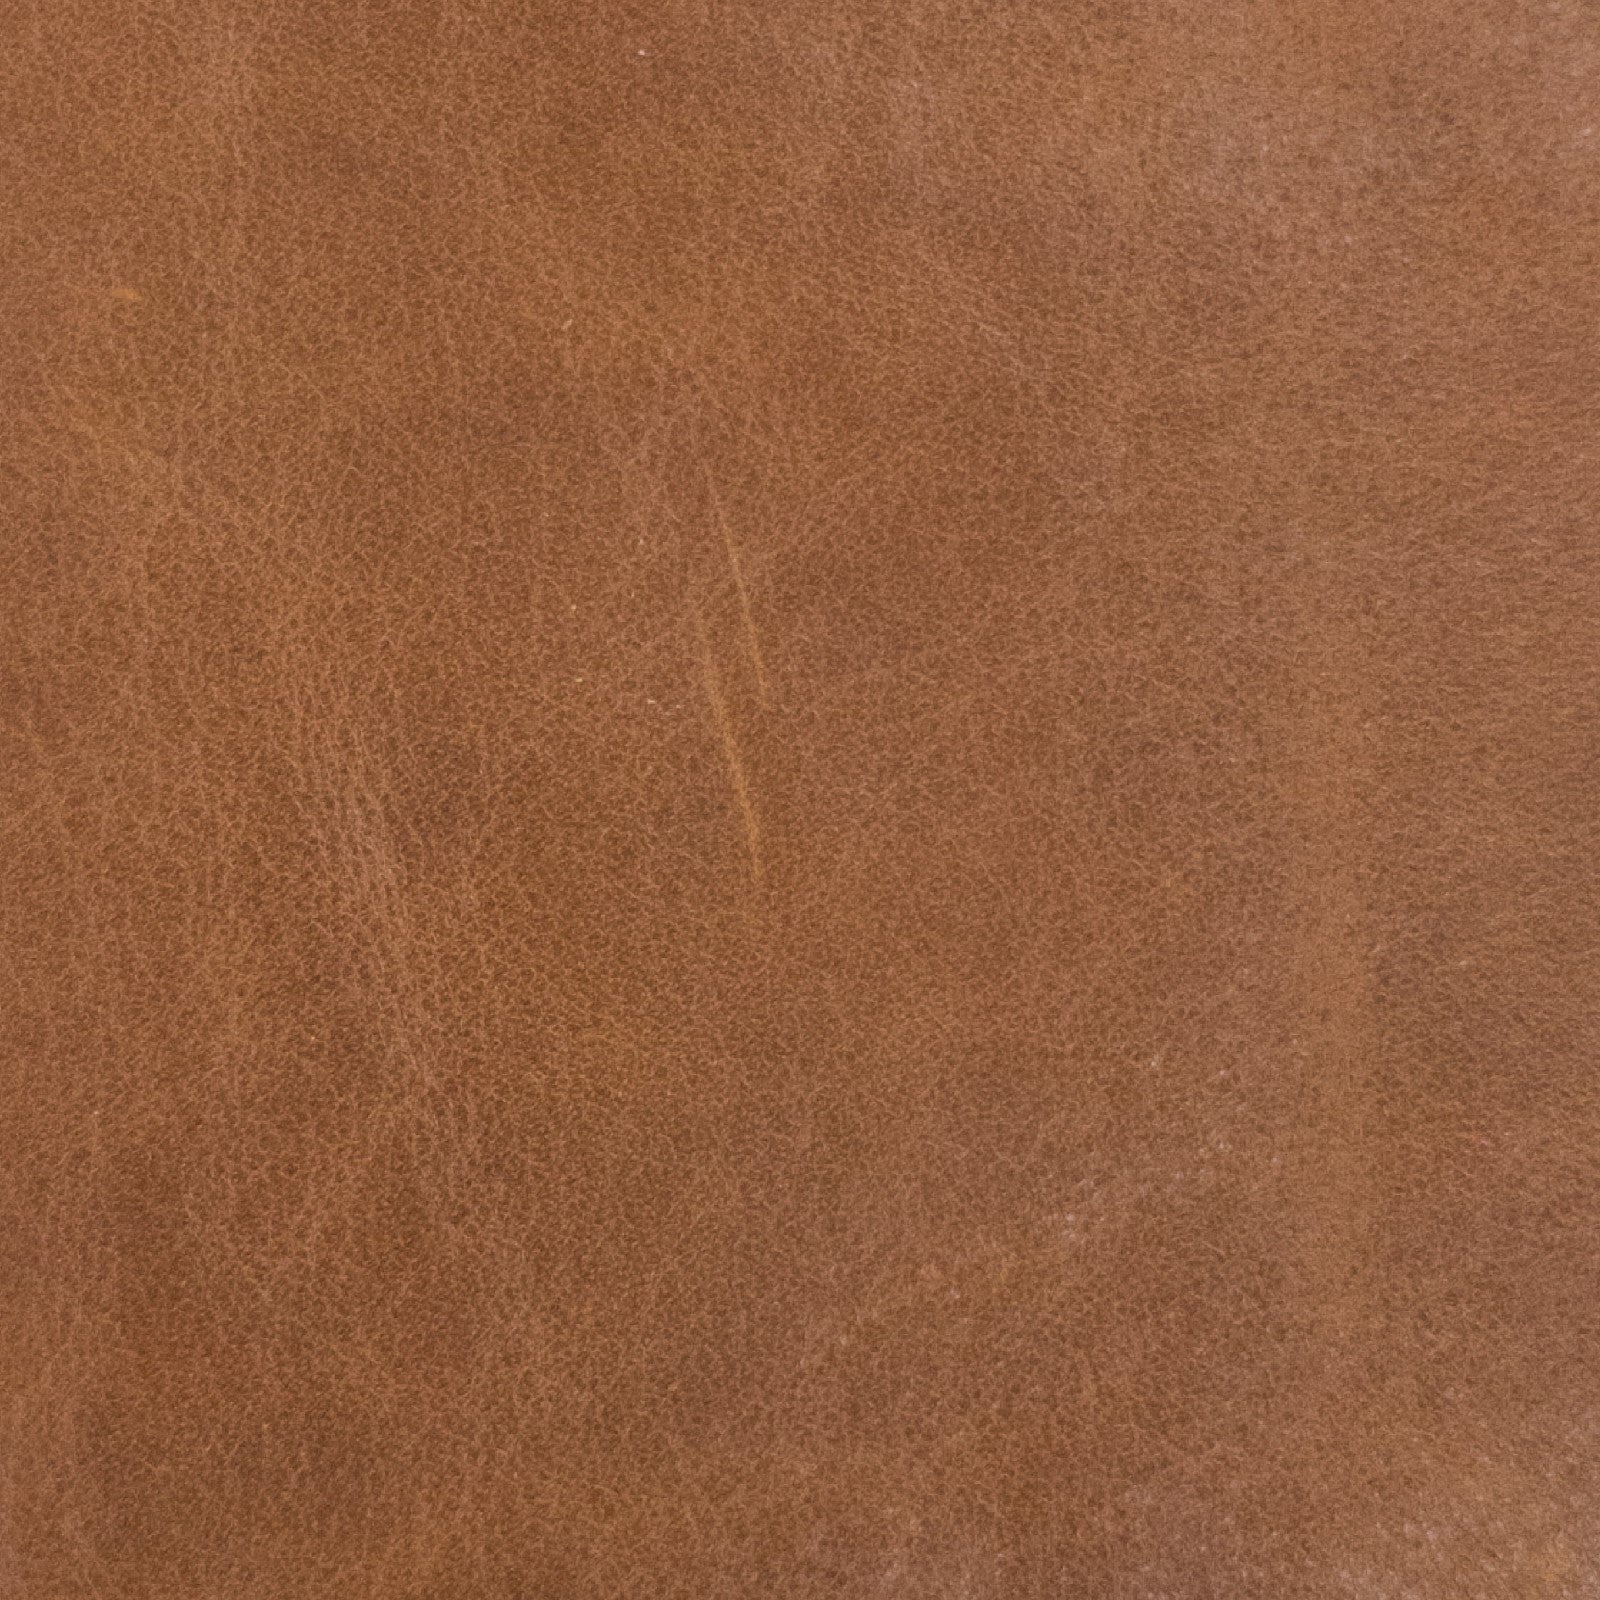 Shenandoah Collection 48-55 SF Full Hide Variation, Chestnut Brown | The Leather Guy